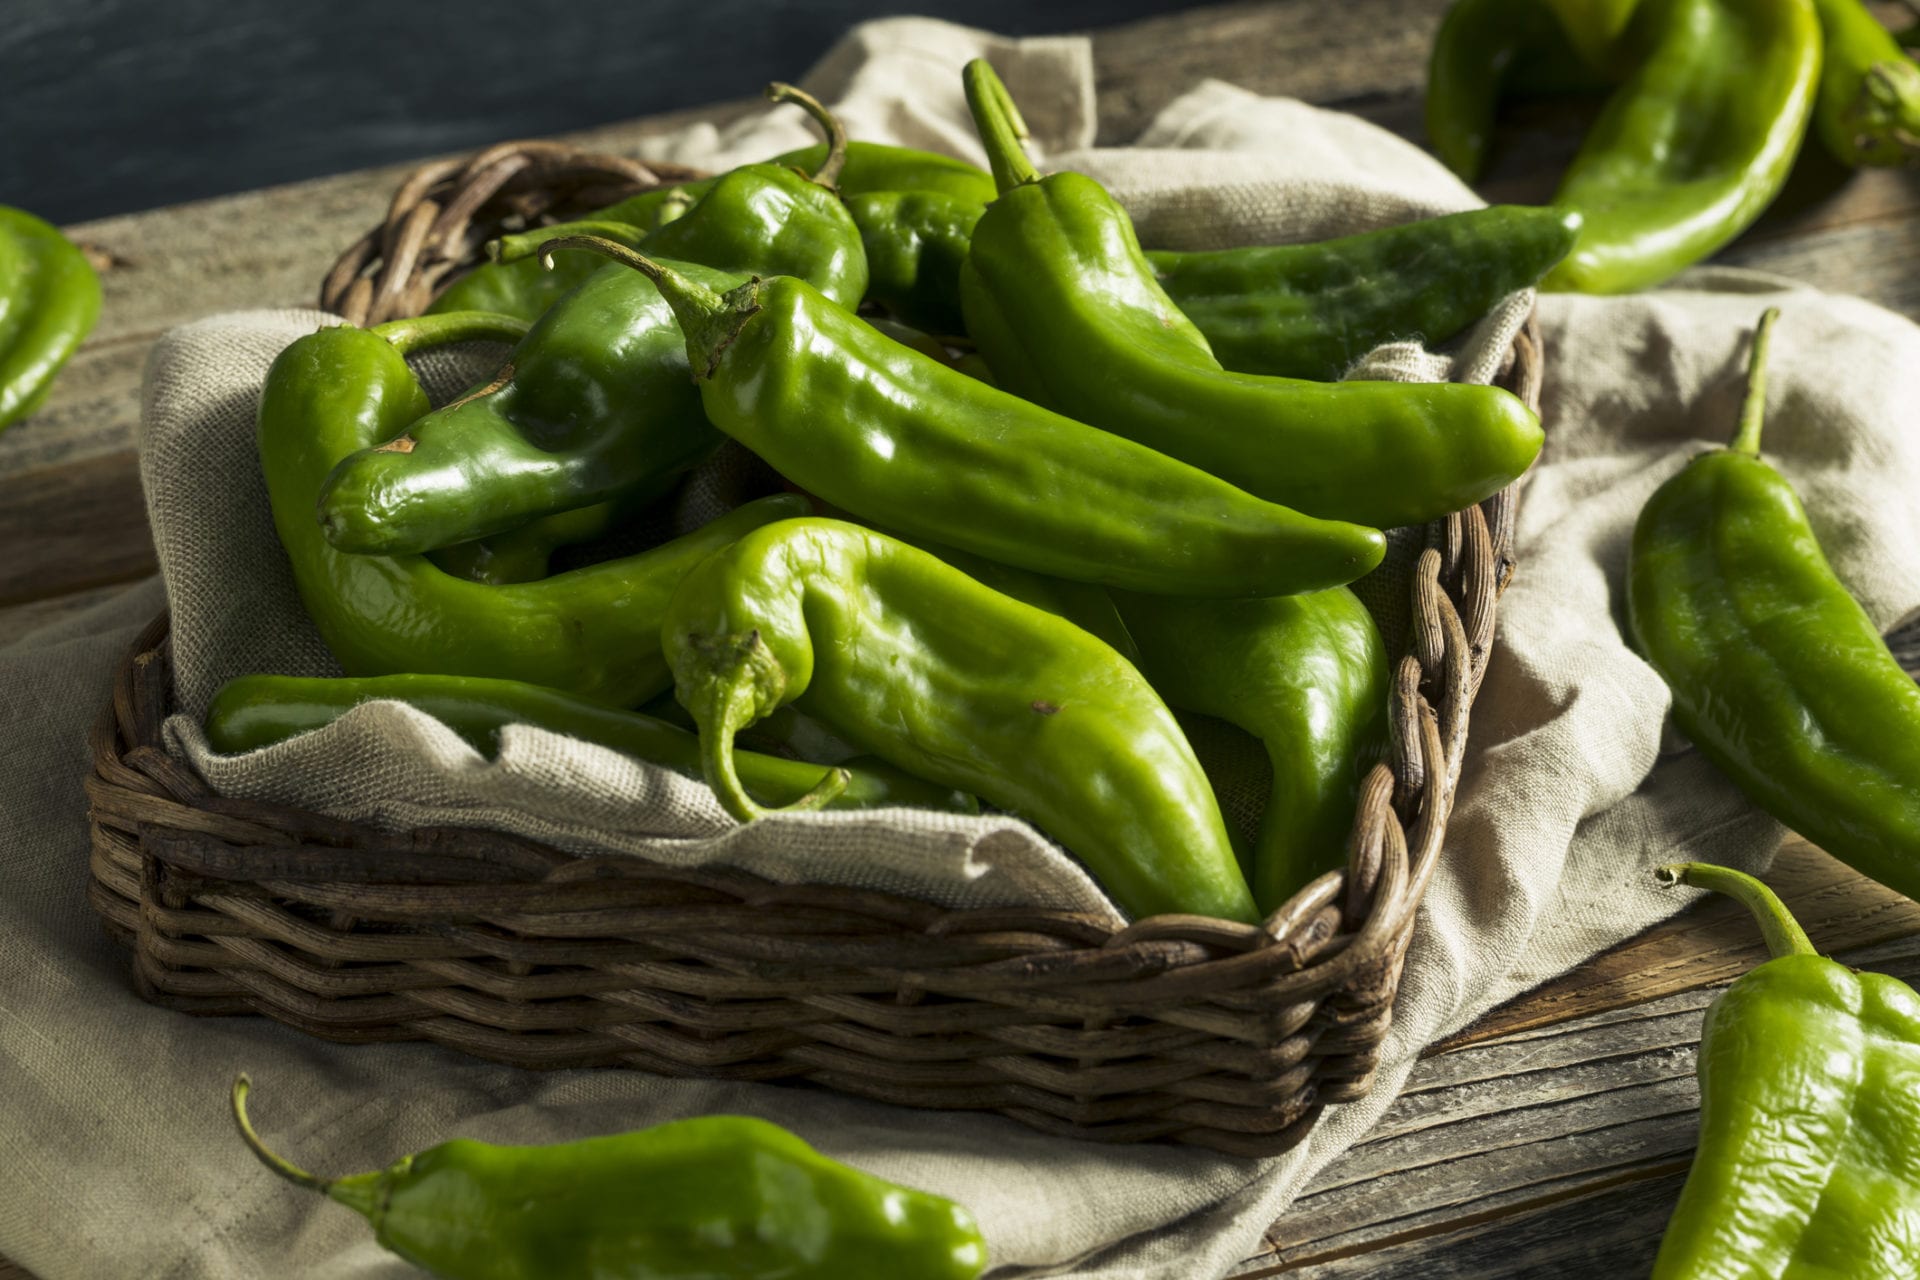 Its Hatch Chile Pepper season, and Strack & Van Til is roasting up a